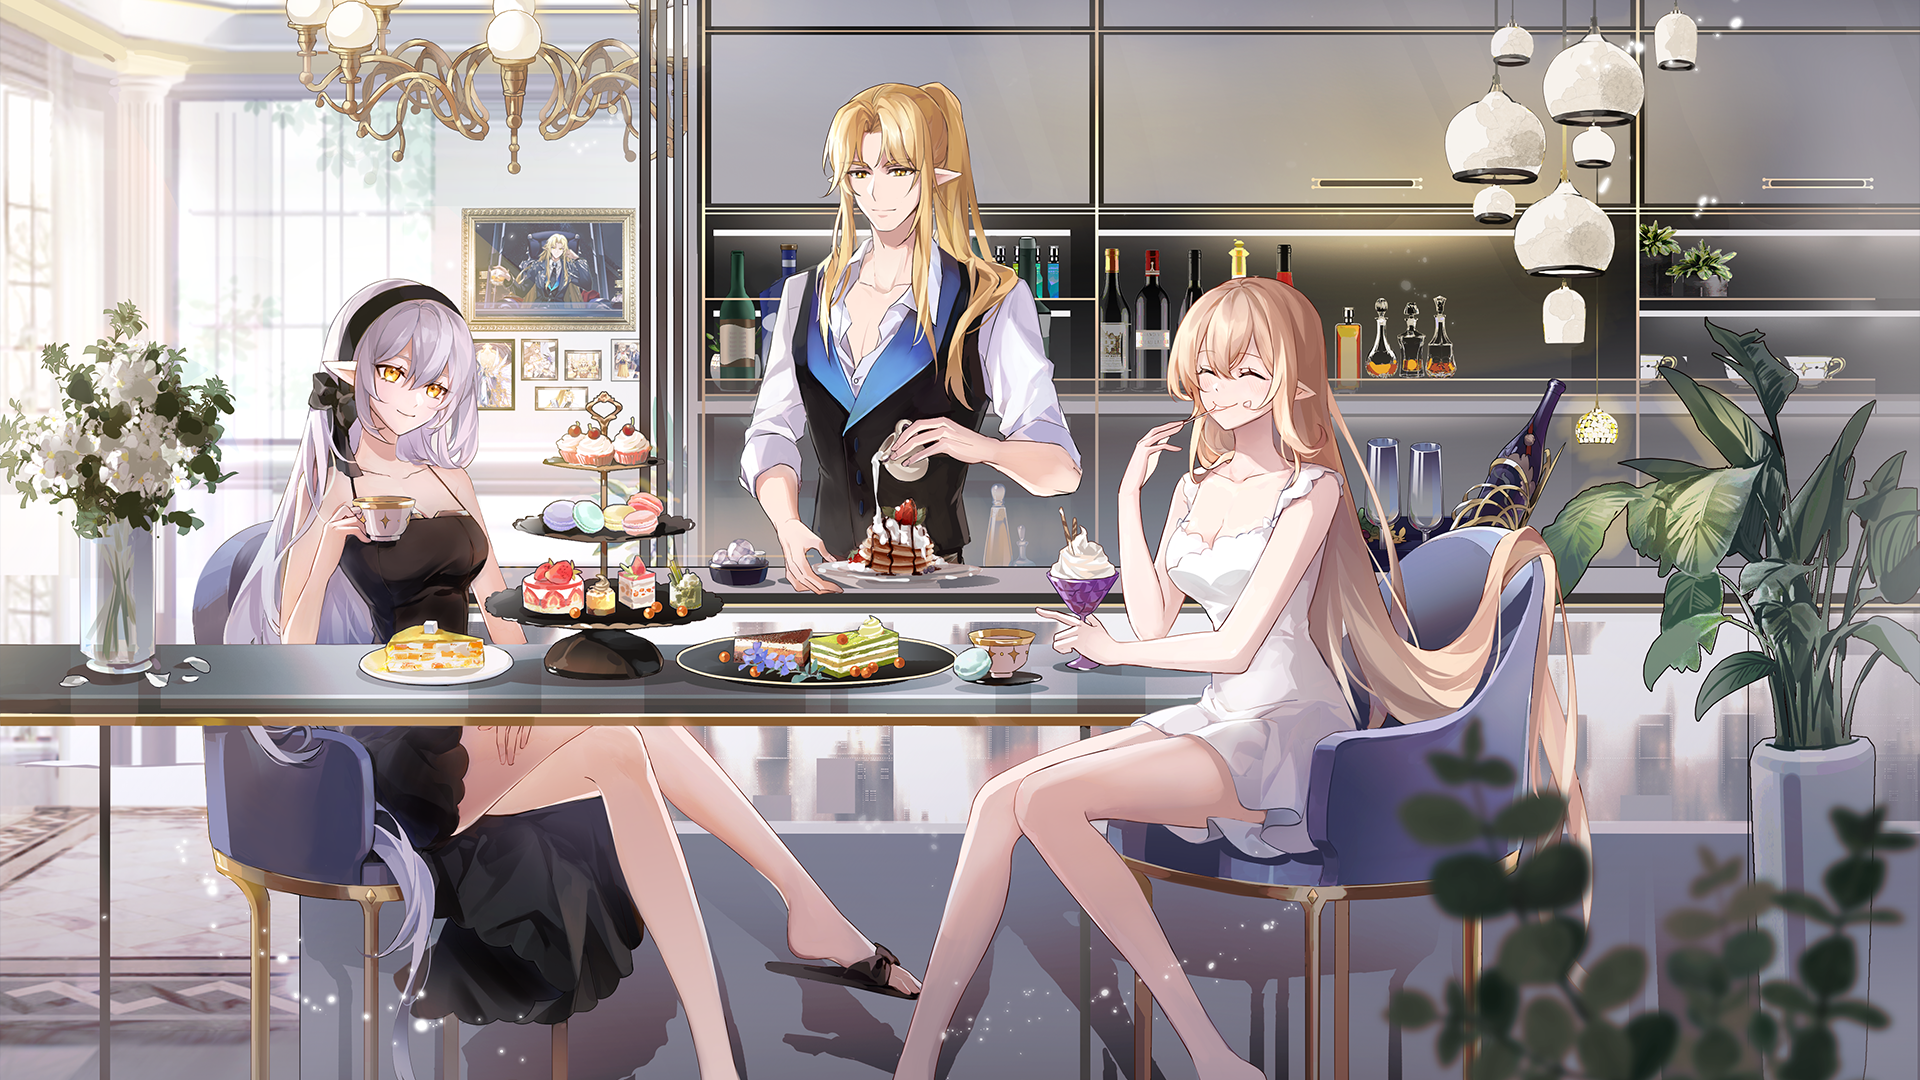 Brothers Sisters Sweets Food Blonde Closed Eyes Pointy Ears Anime Girls Anime Boys 1920x1080